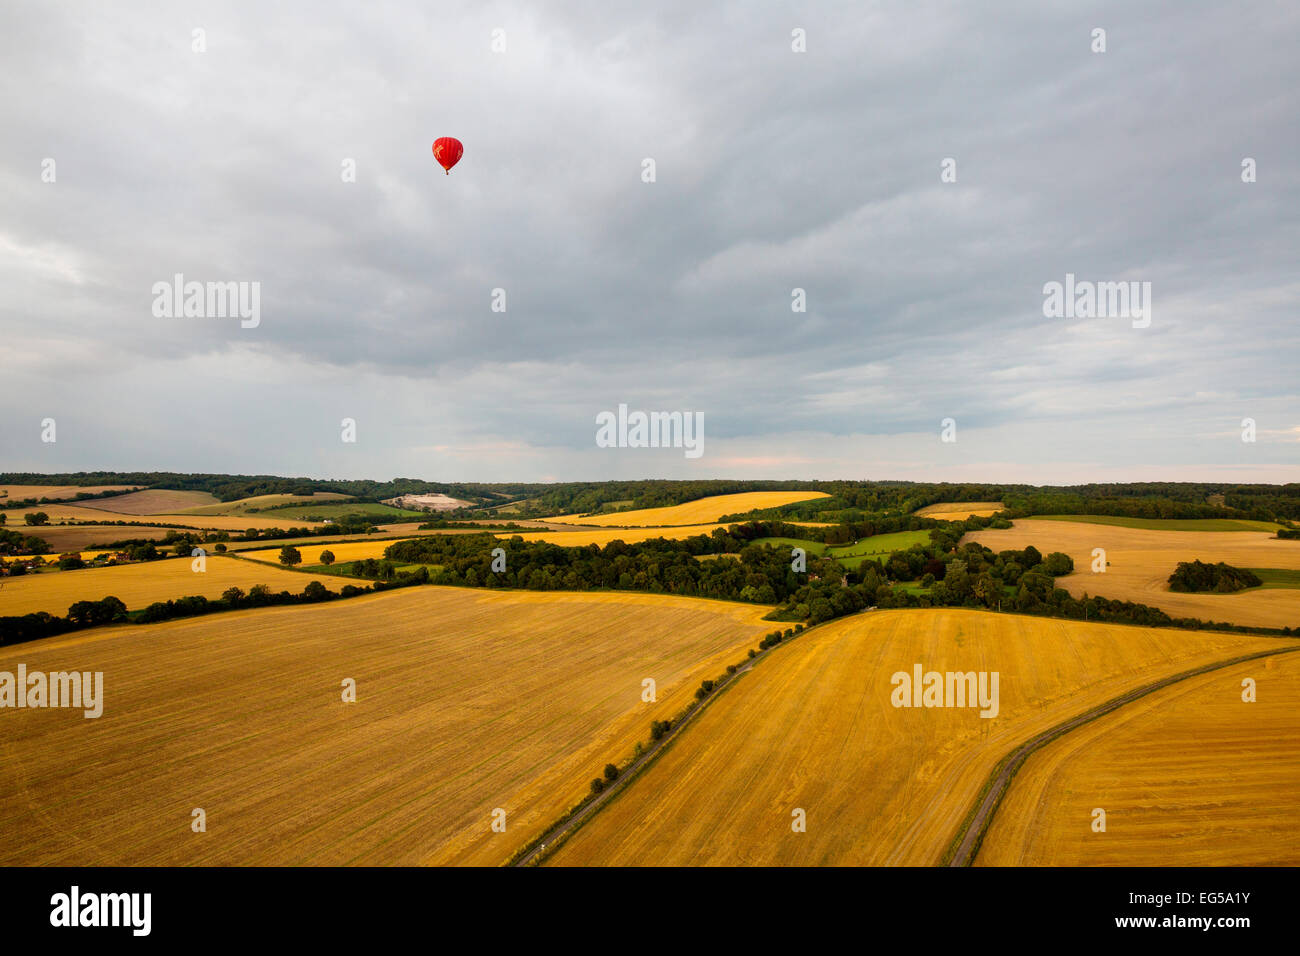 Vue éloignée sur red hot air balloon flying over rural landscape, south Oxfordshire, Angleterre Banque D'Images